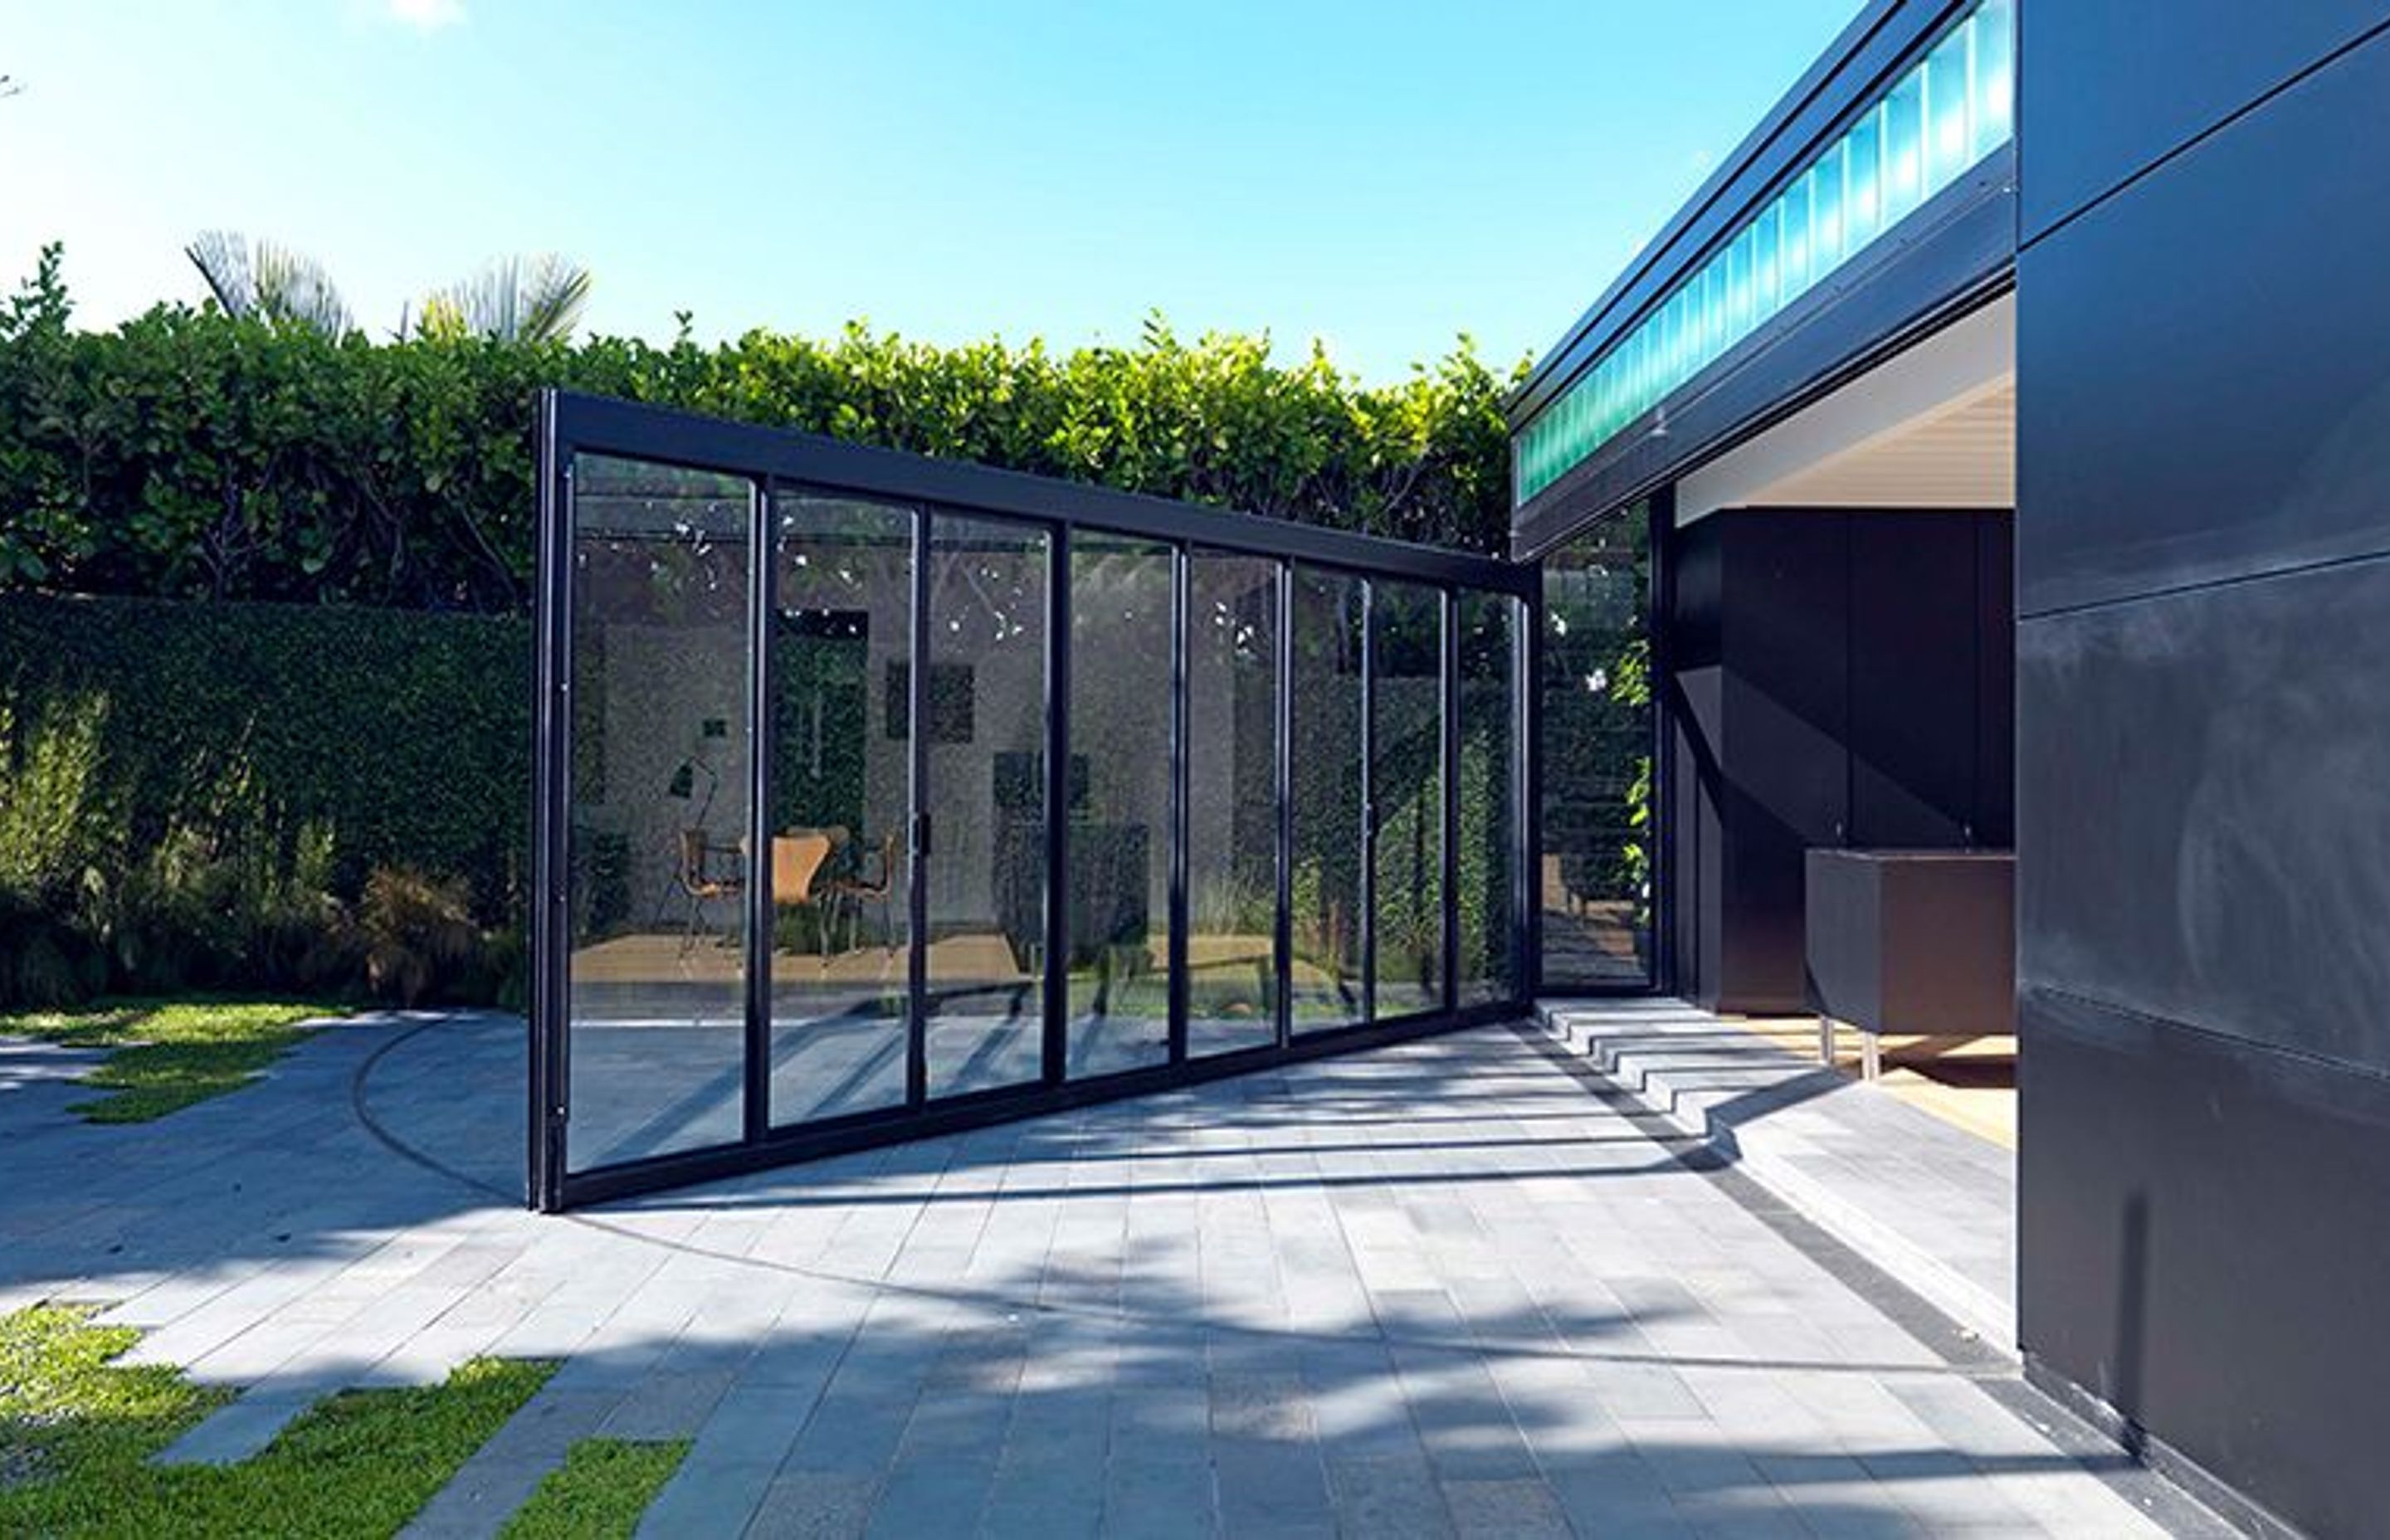 The opening wall of steel joinery and glass incorporates two pairs of French doors that can be used independently when the wall is closed.